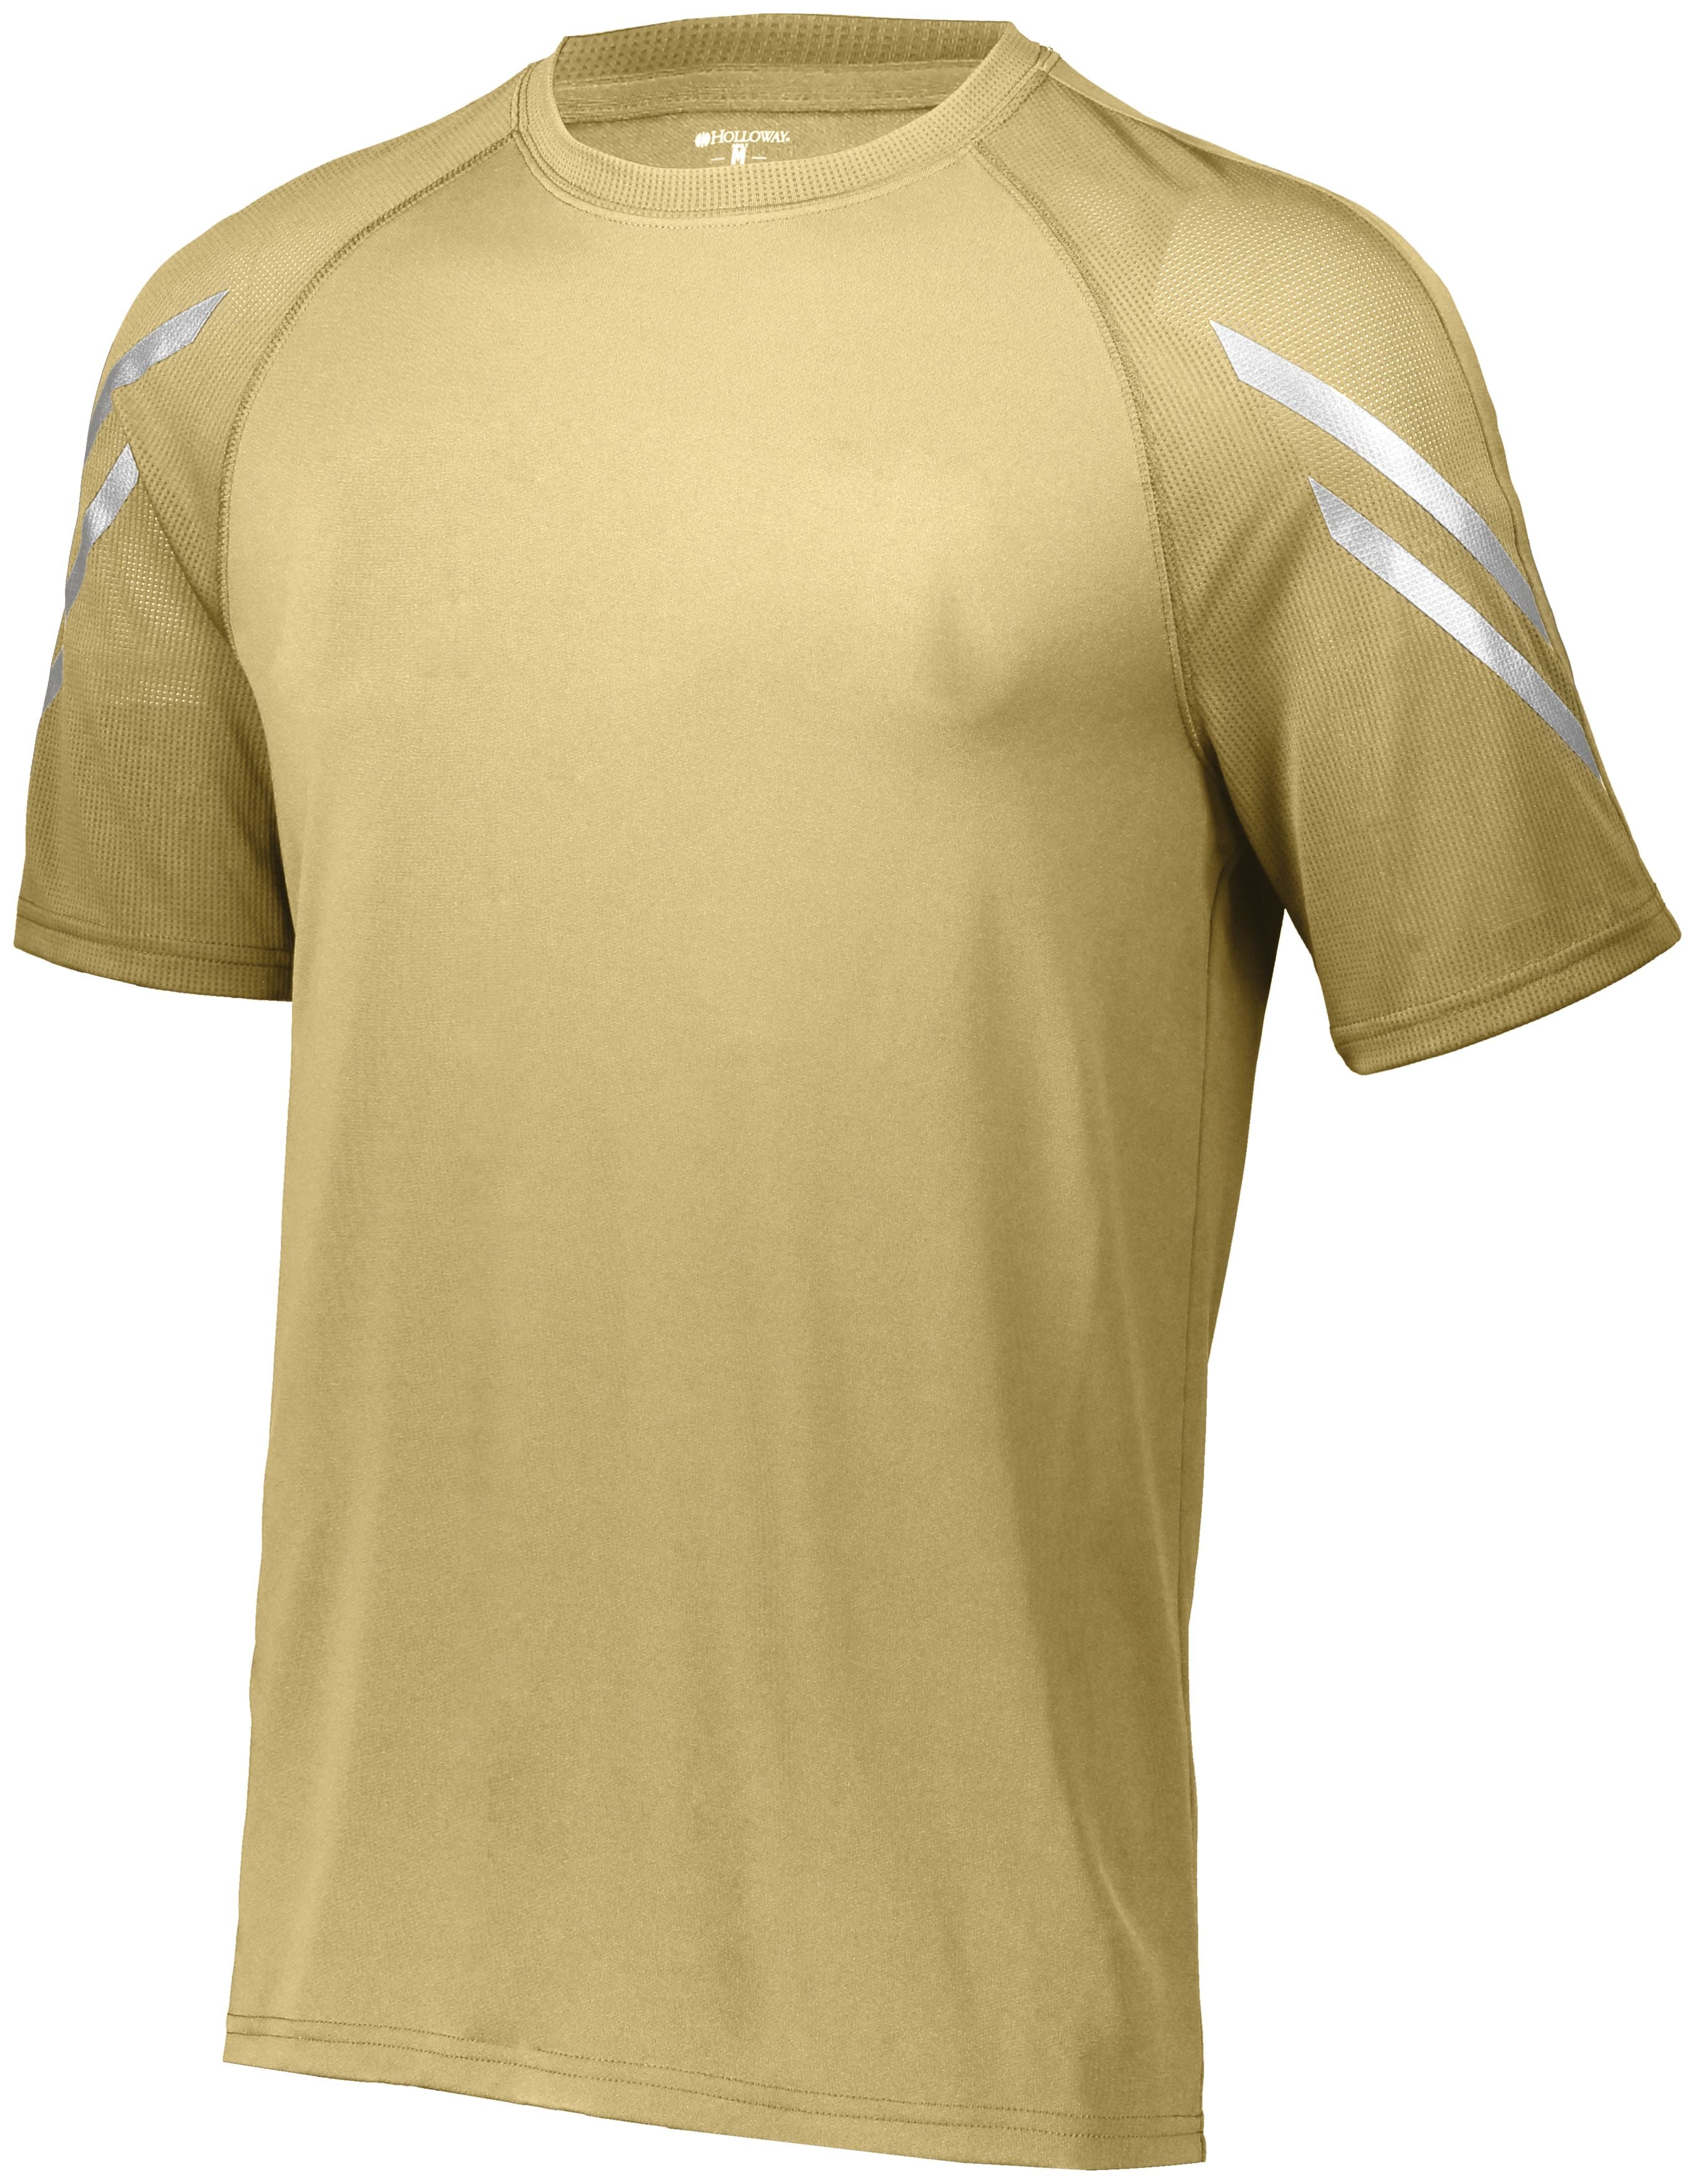 Holloway Flux Shirt Short Sleeve in Vegas Gold  -Part of the Adult, Holloway, Shirts, Flux-Collection product lines at KanaleyCreations.com